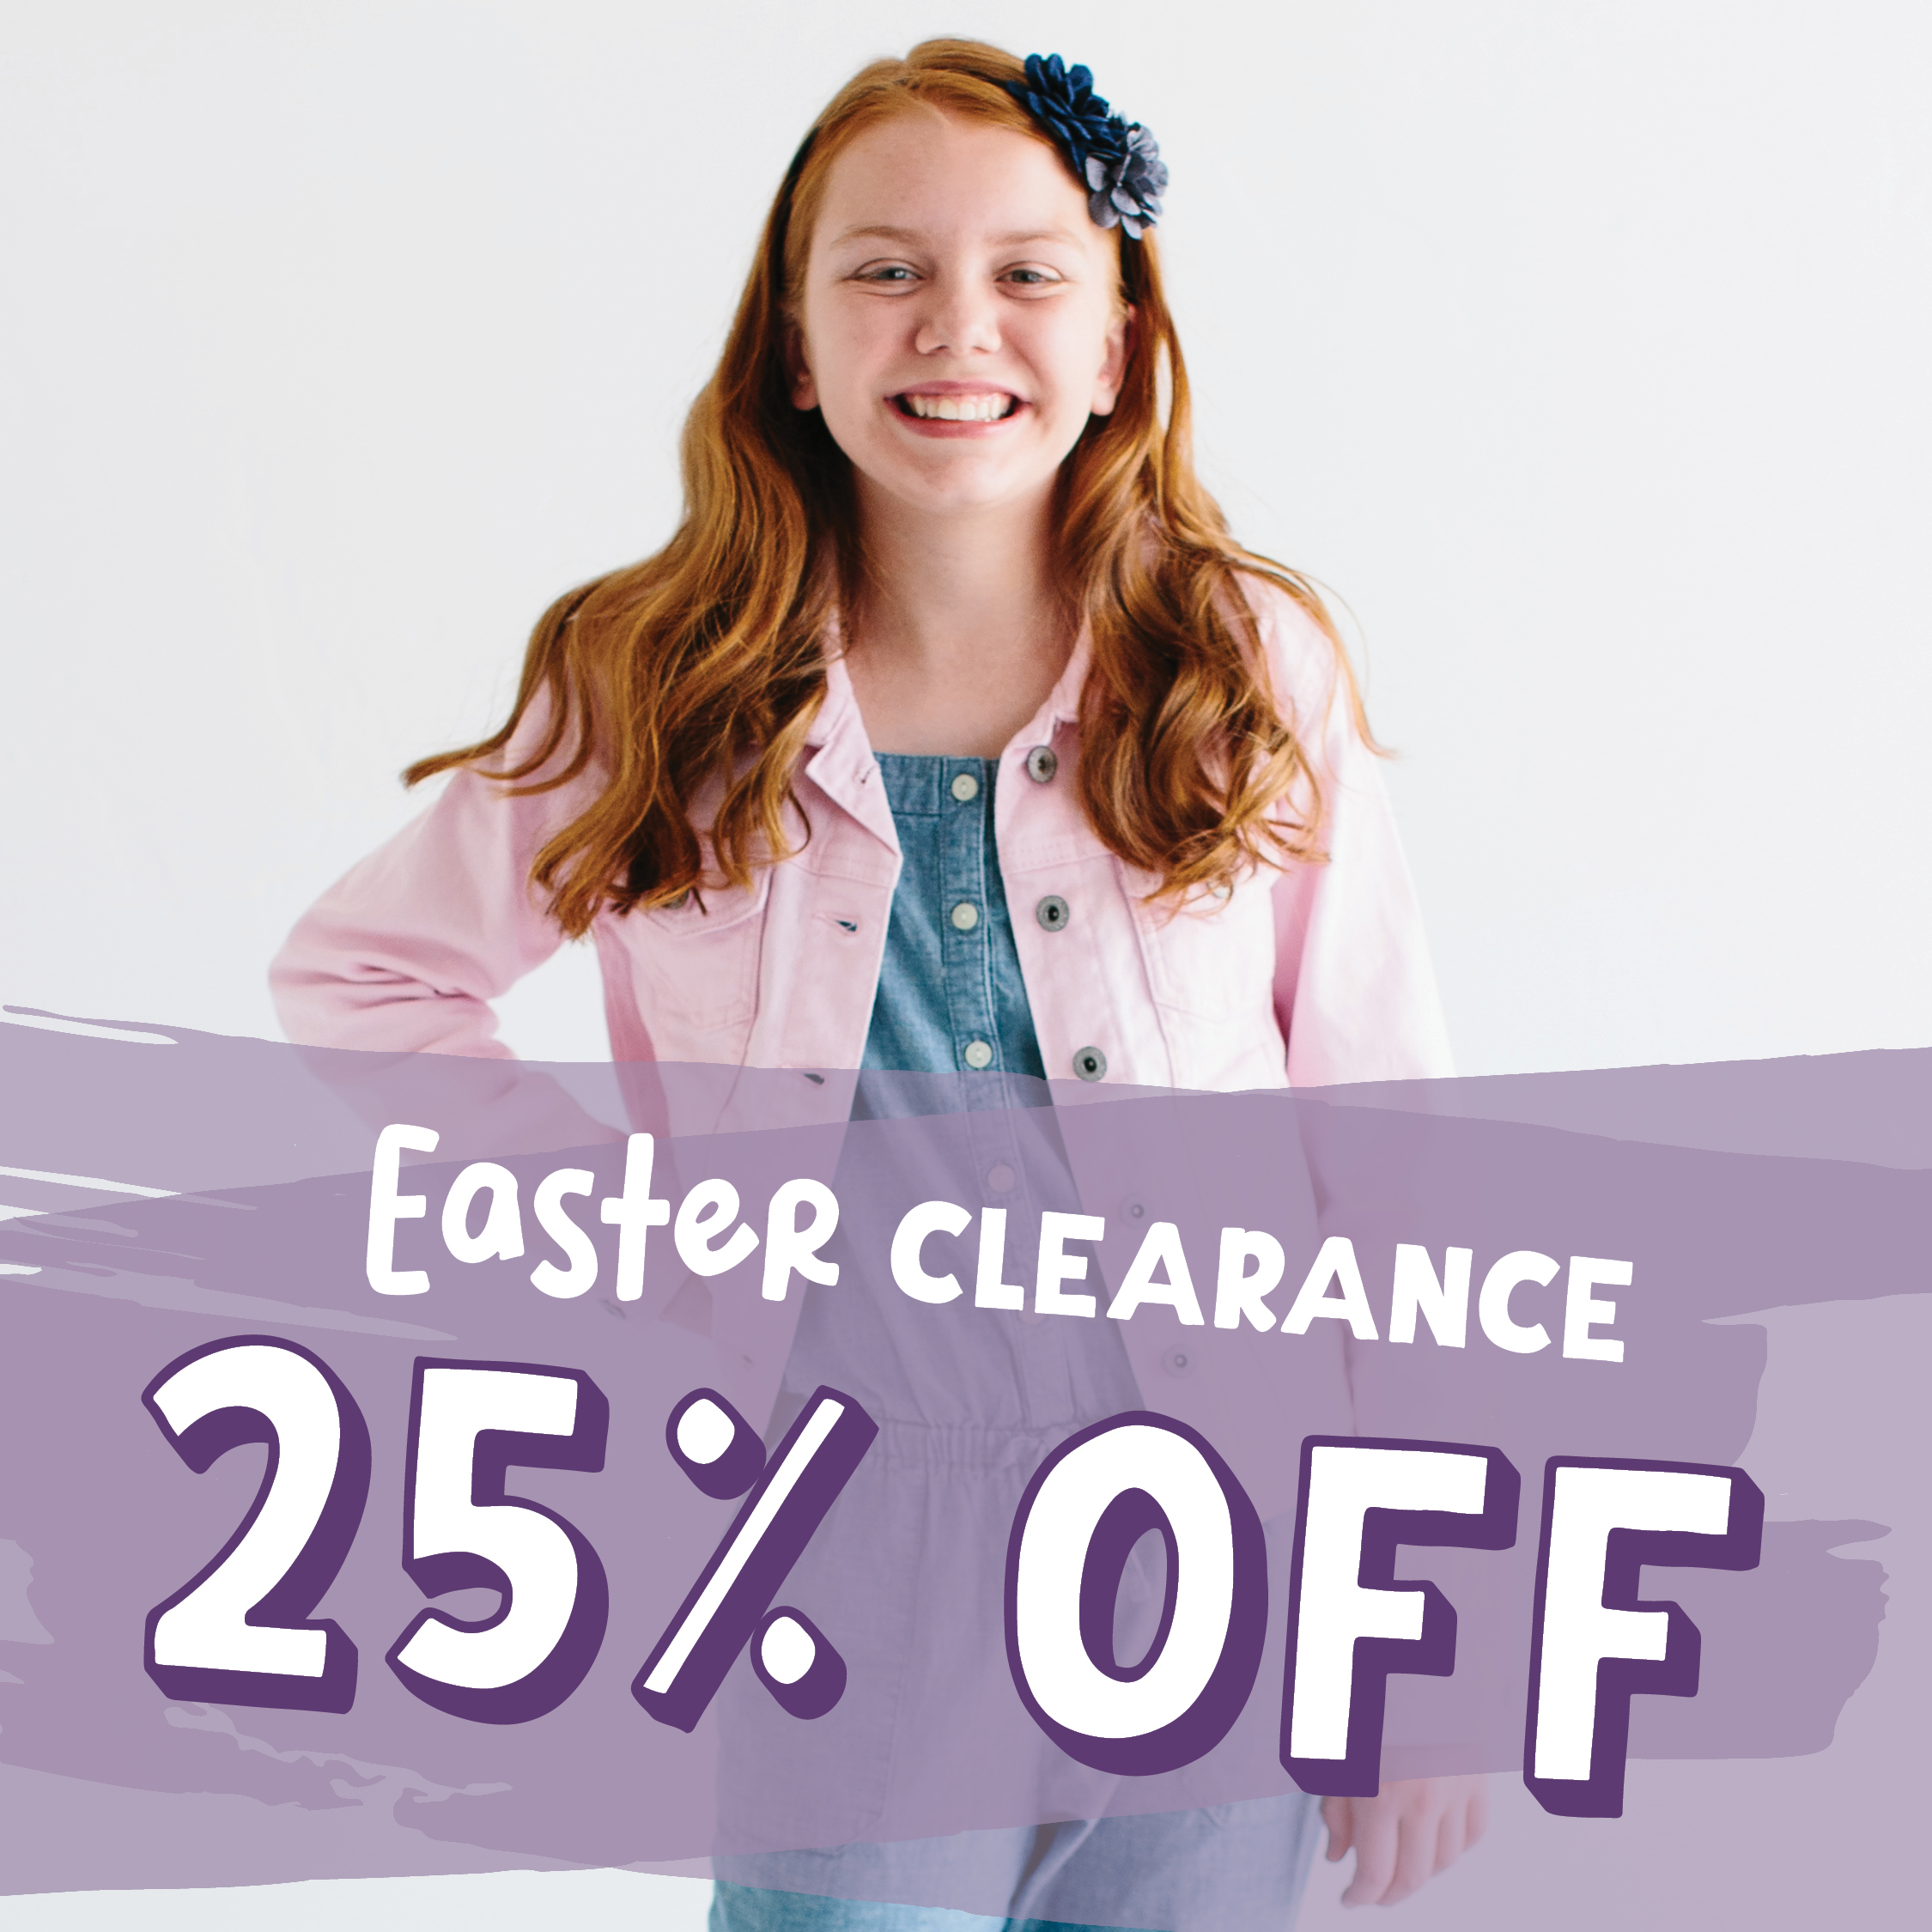 Easter Clearance [25 Off] - Social_1000x1000 - K2K - Q1.2021